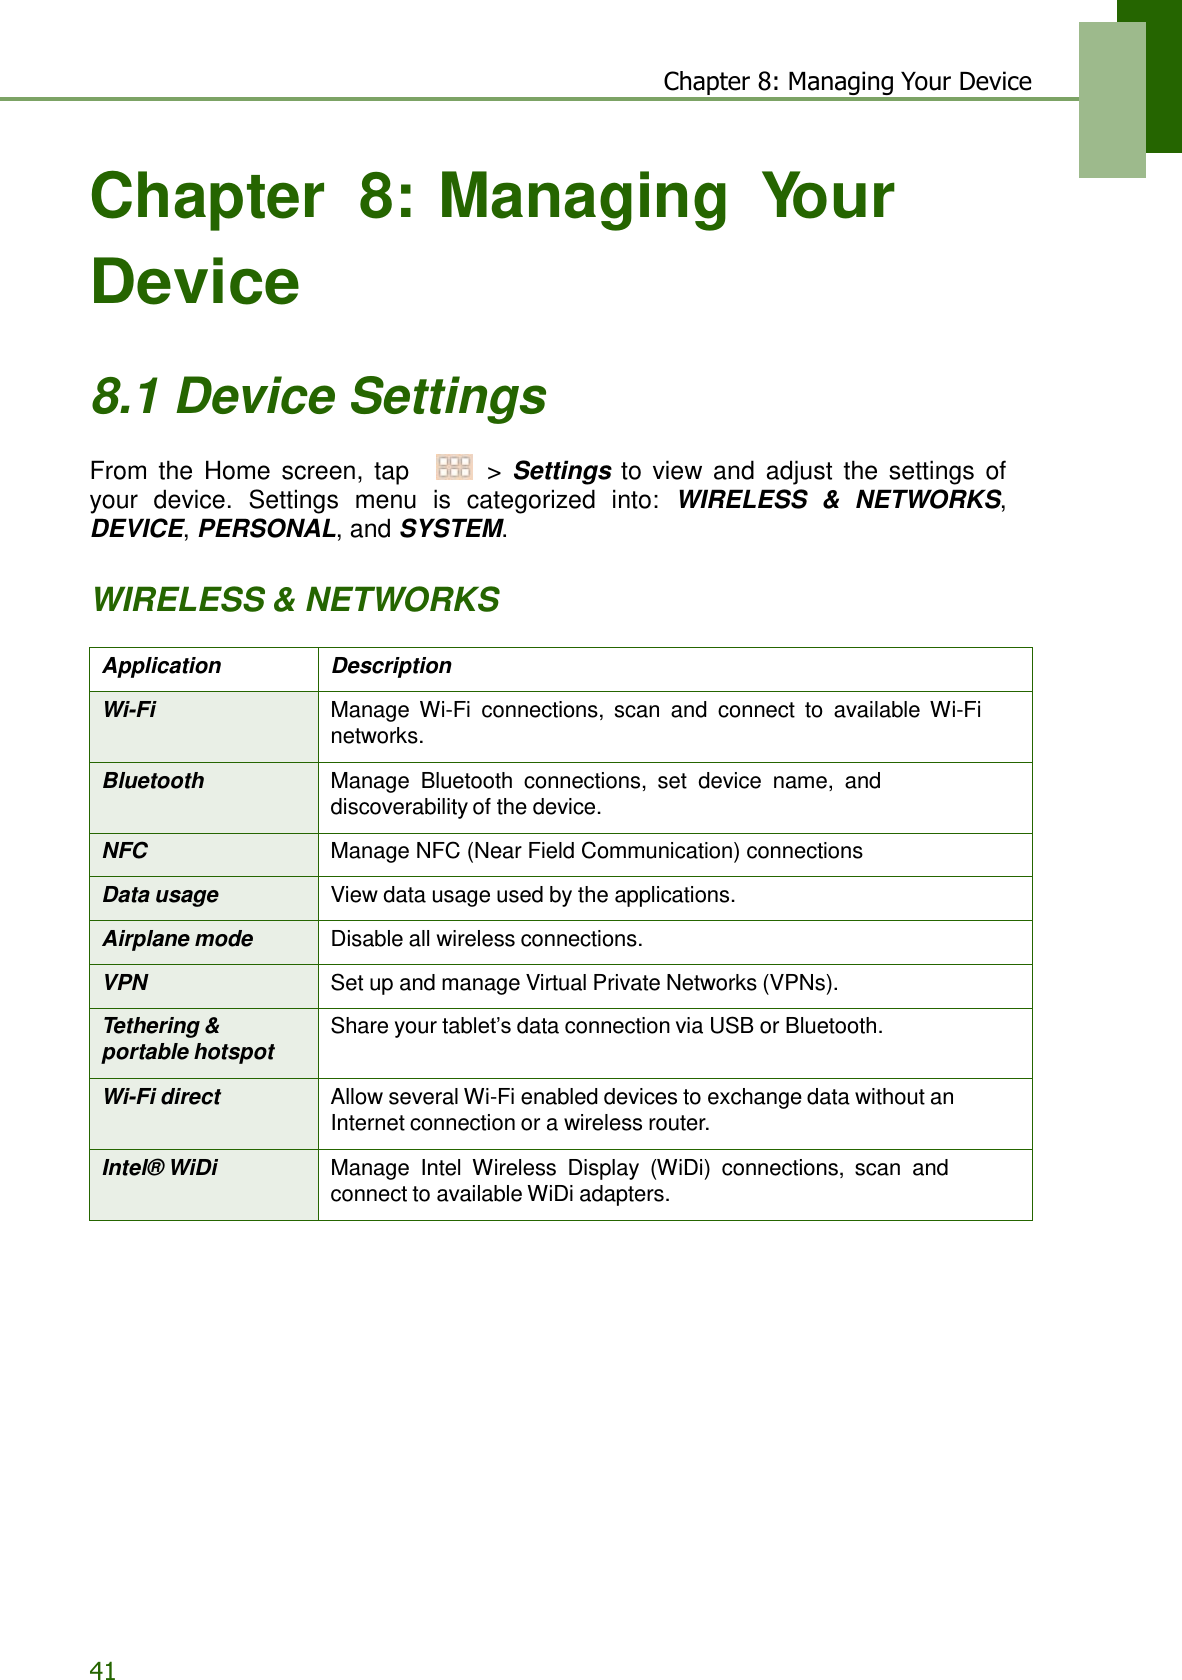 41 Chapter 8: Managing Your Device    Chapter  8: Managing  Your Device   8.1 Device Settings  From  the  Home  screen,  tap     &gt;  Settings  to view  and  adjust  the  settings  of your  device.  Settings  menu  is  categorized  into:  WIRELESS  &amp;  NETWORKS, DEVICE, PERSONAL, and SYSTEM.   WIRELESS &amp; NETWORKS  Application Description Wi-Fi Manage Wi-Fi  connections,  scan  and  connect  to  available  Wi-Fi networks. Bluetooth Manage Bluetooth  connections,  set  device  name,  and discoverability of the device. NFC Manage NFC (Near Field Communication) connections Data usage View data usage used by the applications. Airplane mode Disable all wireless connections. VPN Set up and manage Virtual Private Networks (VPNs). Tethering &amp; portable hotspot Share your tablet’s data connection via USB or Bluetooth. Wi-Fi direct Allow several Wi-Fi enabled devices to exchange data without an Internet connection or a wireless router. Intel® WiDi Manage  Intel  Wireless  Display  (WiDi)  connections,  scan  and connect to available WiDi adapters. 